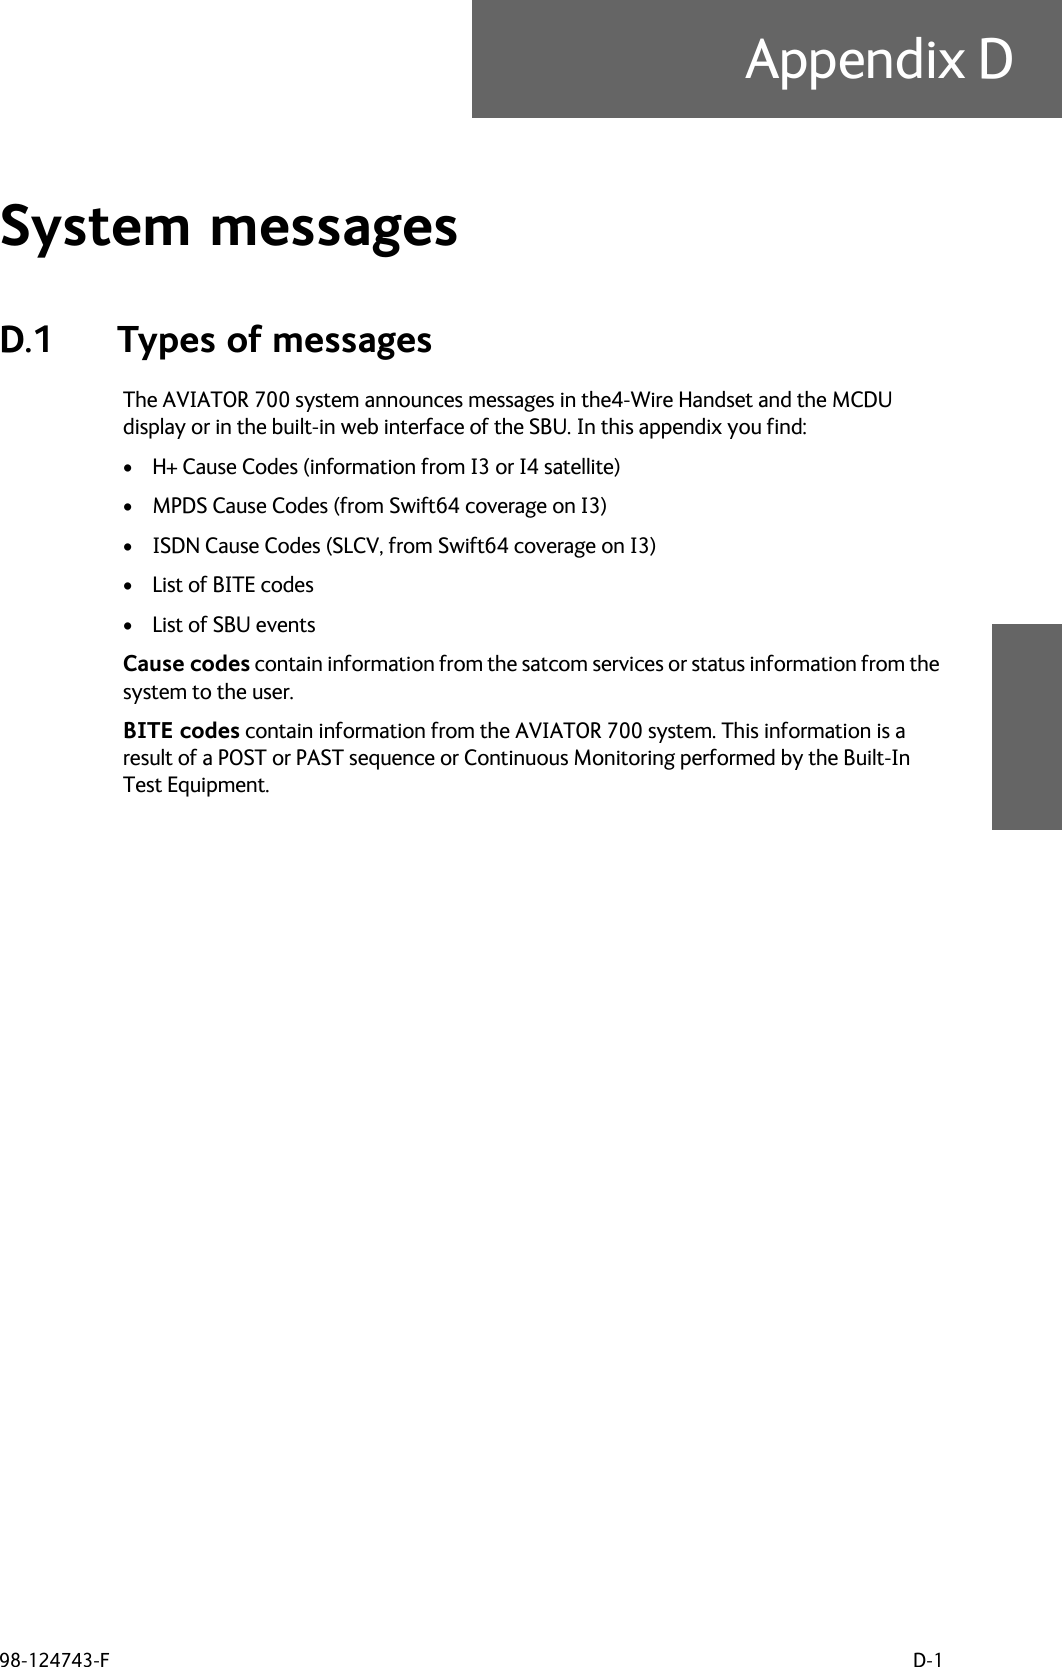 98-124743-F D-1Appendix DSystem messages DD.1 Types of messagesThe AVIATOR 700 system announces messages in the4-Wire Handset and the MCDU display or in the built-in web interface of the SBU. In this appendix you find:•H+ Cause Codes (information from I3 or I4 satellite)•MPDS Cause Codes (from Swift64 coverage on I3)•ISDN Cause Codes (SLCV, from Swift64 coverage on I3)•List of BITE codes•List of SBU eventsCause codes contain information from the satcom services or status information from the system to the user. BITE codes contain information from the AVIATOR 700 system. This information is a result of a POST or PAST sequence or Continuous Monitoring performed by the Built-In Test Equipment. 